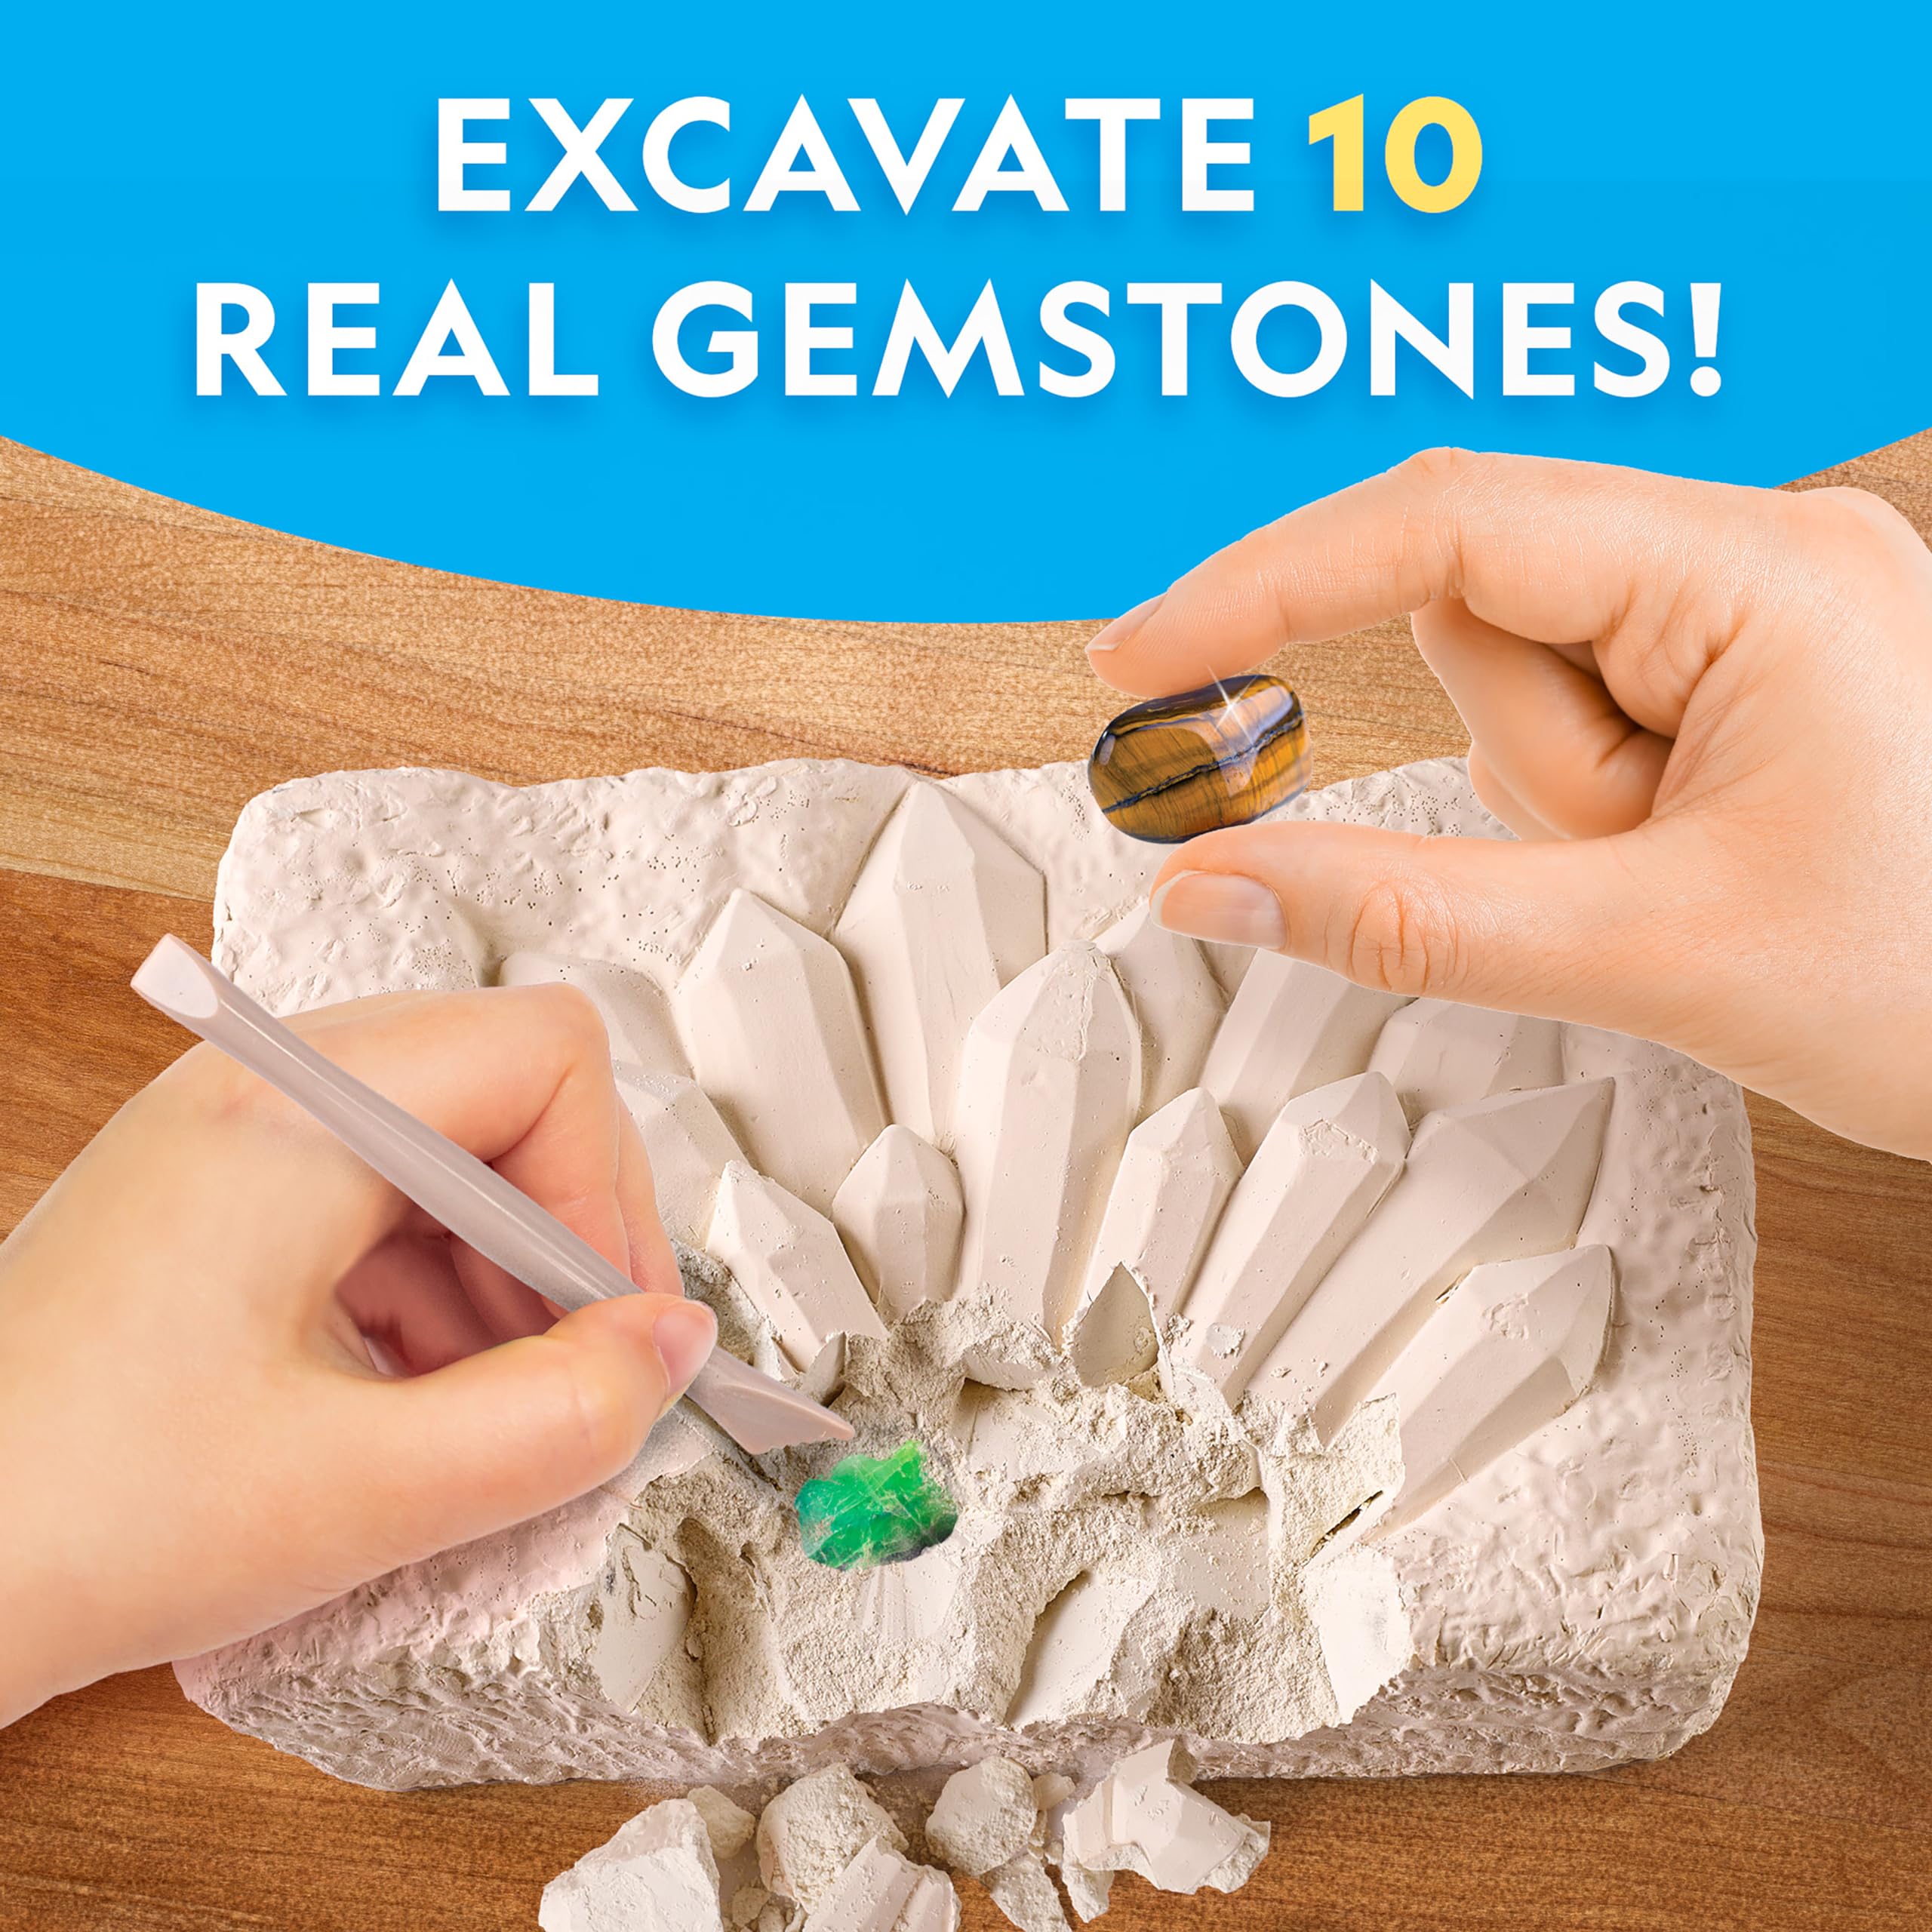 NATIONAL GEOGRAPHIC Super Gemstone Dig Kit - Excavation Gem Kit with 10 Real Gemstones for Kids, Discover Gems with Dig Tools & Magnifying Glass, Science Kits for Kids Age 8-12, Crystals for Kids